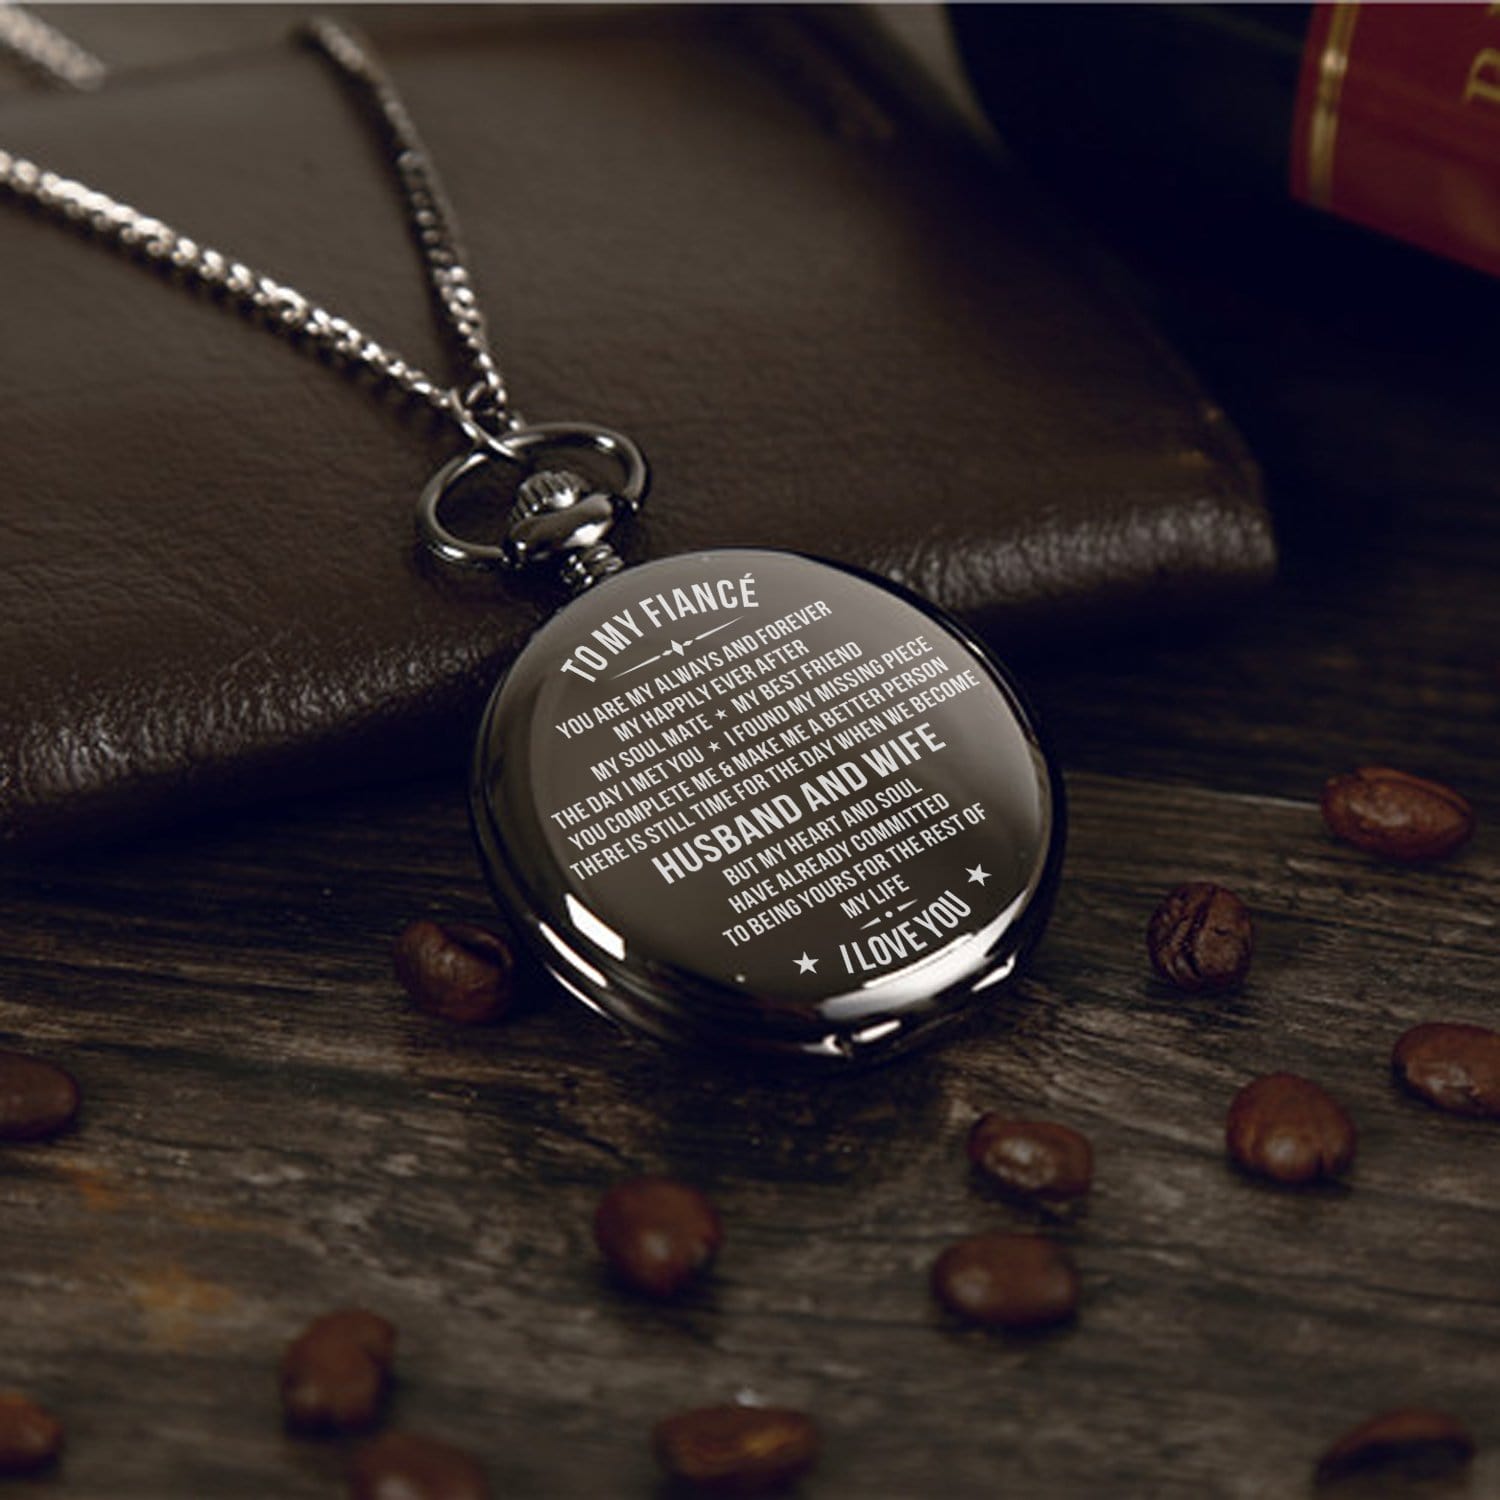 Pocket Watches To My Fiance - I Love You Pocket Watch GiveMe-Gifts